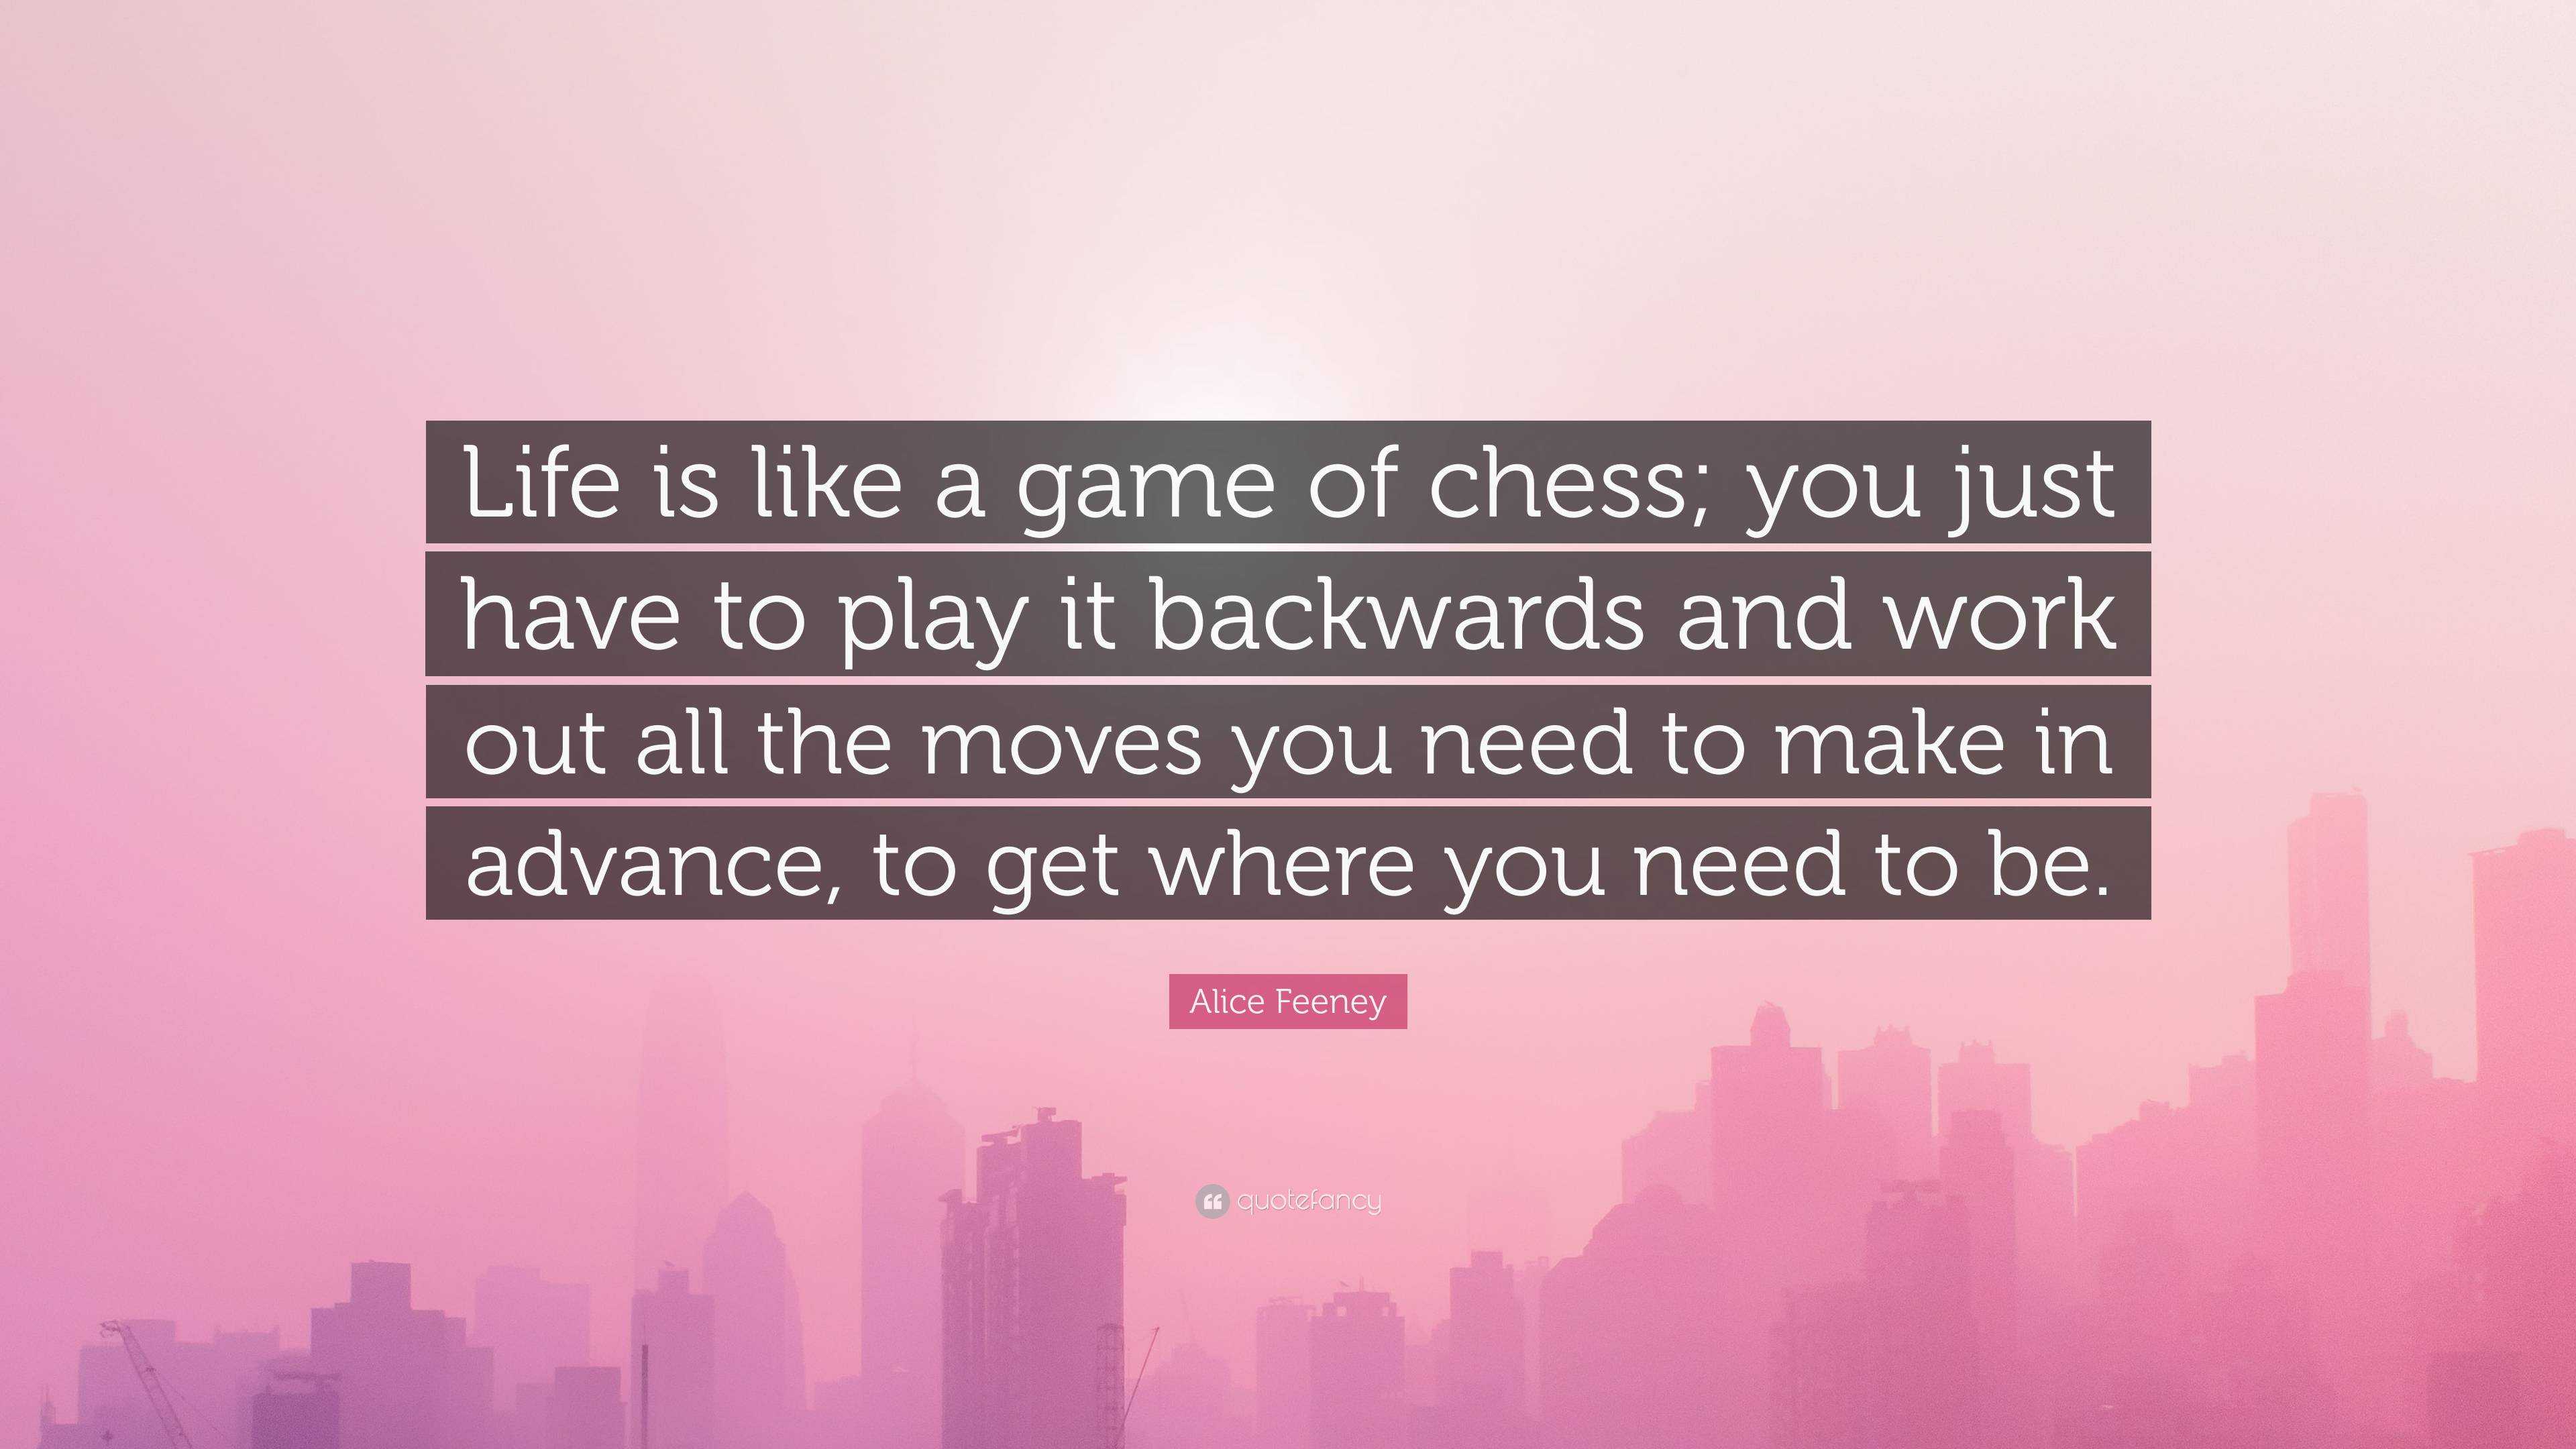 life is like a game of chess. 